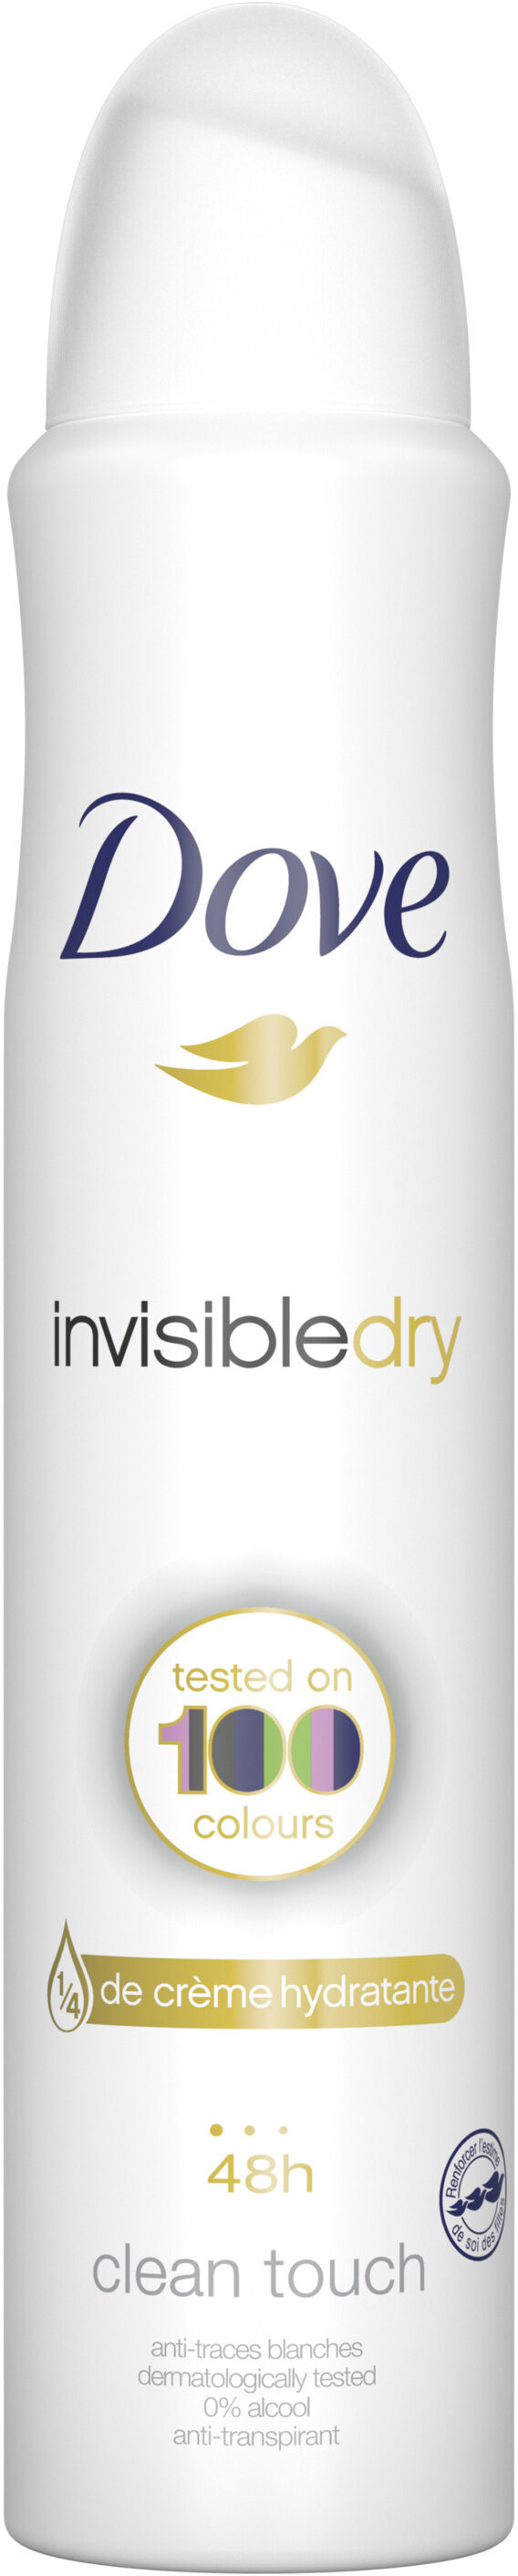 DOVE Anti-Transpirant Femme Spray Invisible Dry 200ml - Product - fr